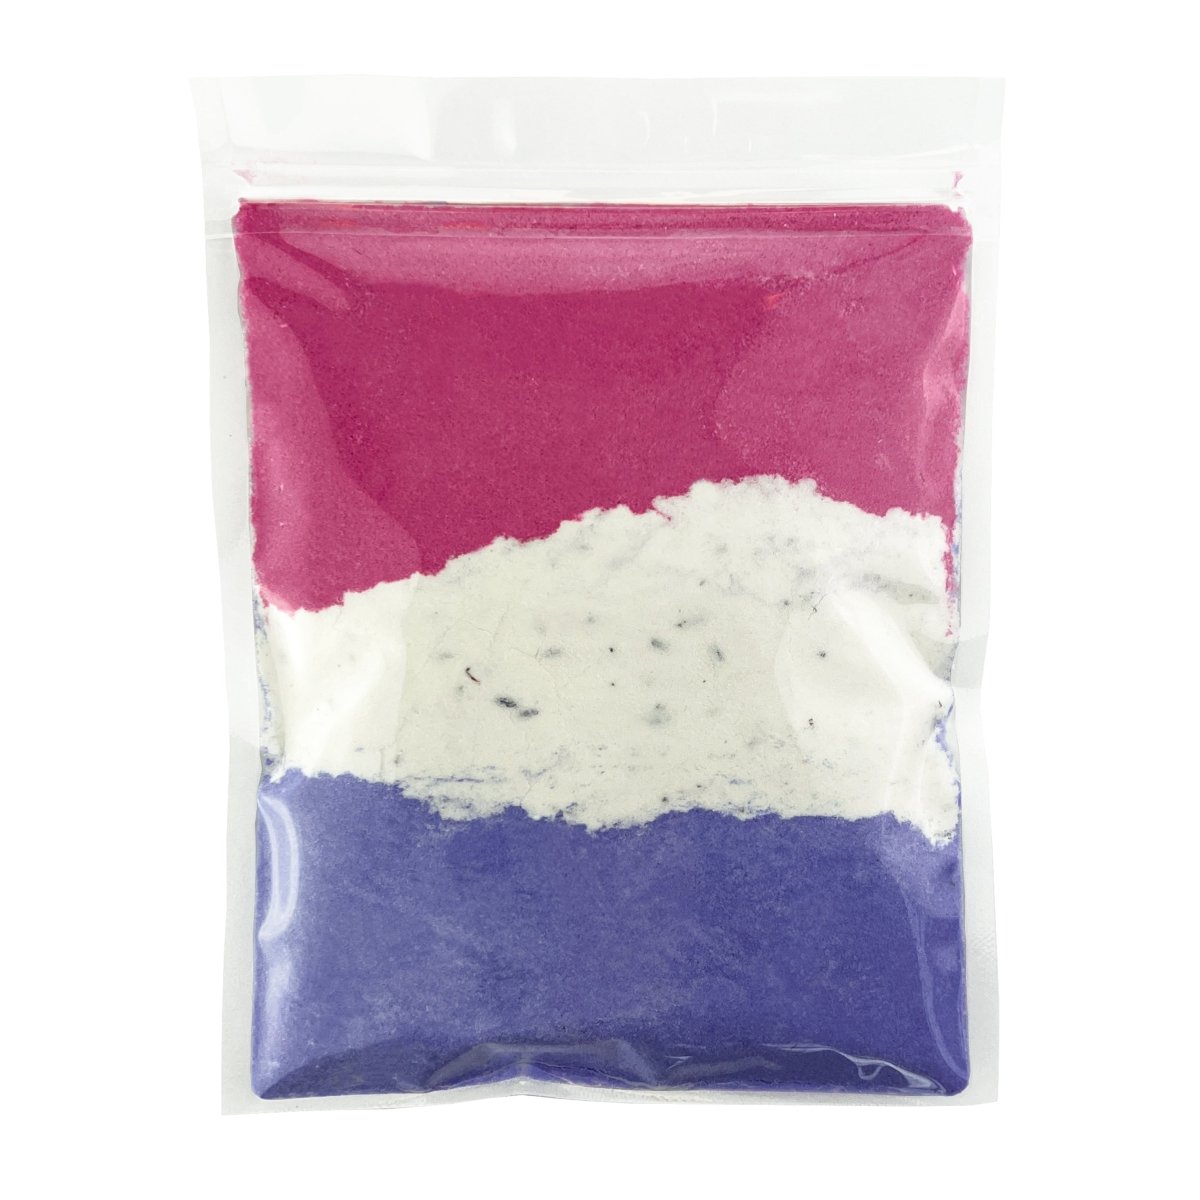 Lights Out Bath Dust for Kids & Adults - Colourful Glitters & Lavender Fragrance - Made in Australia by Bath Box